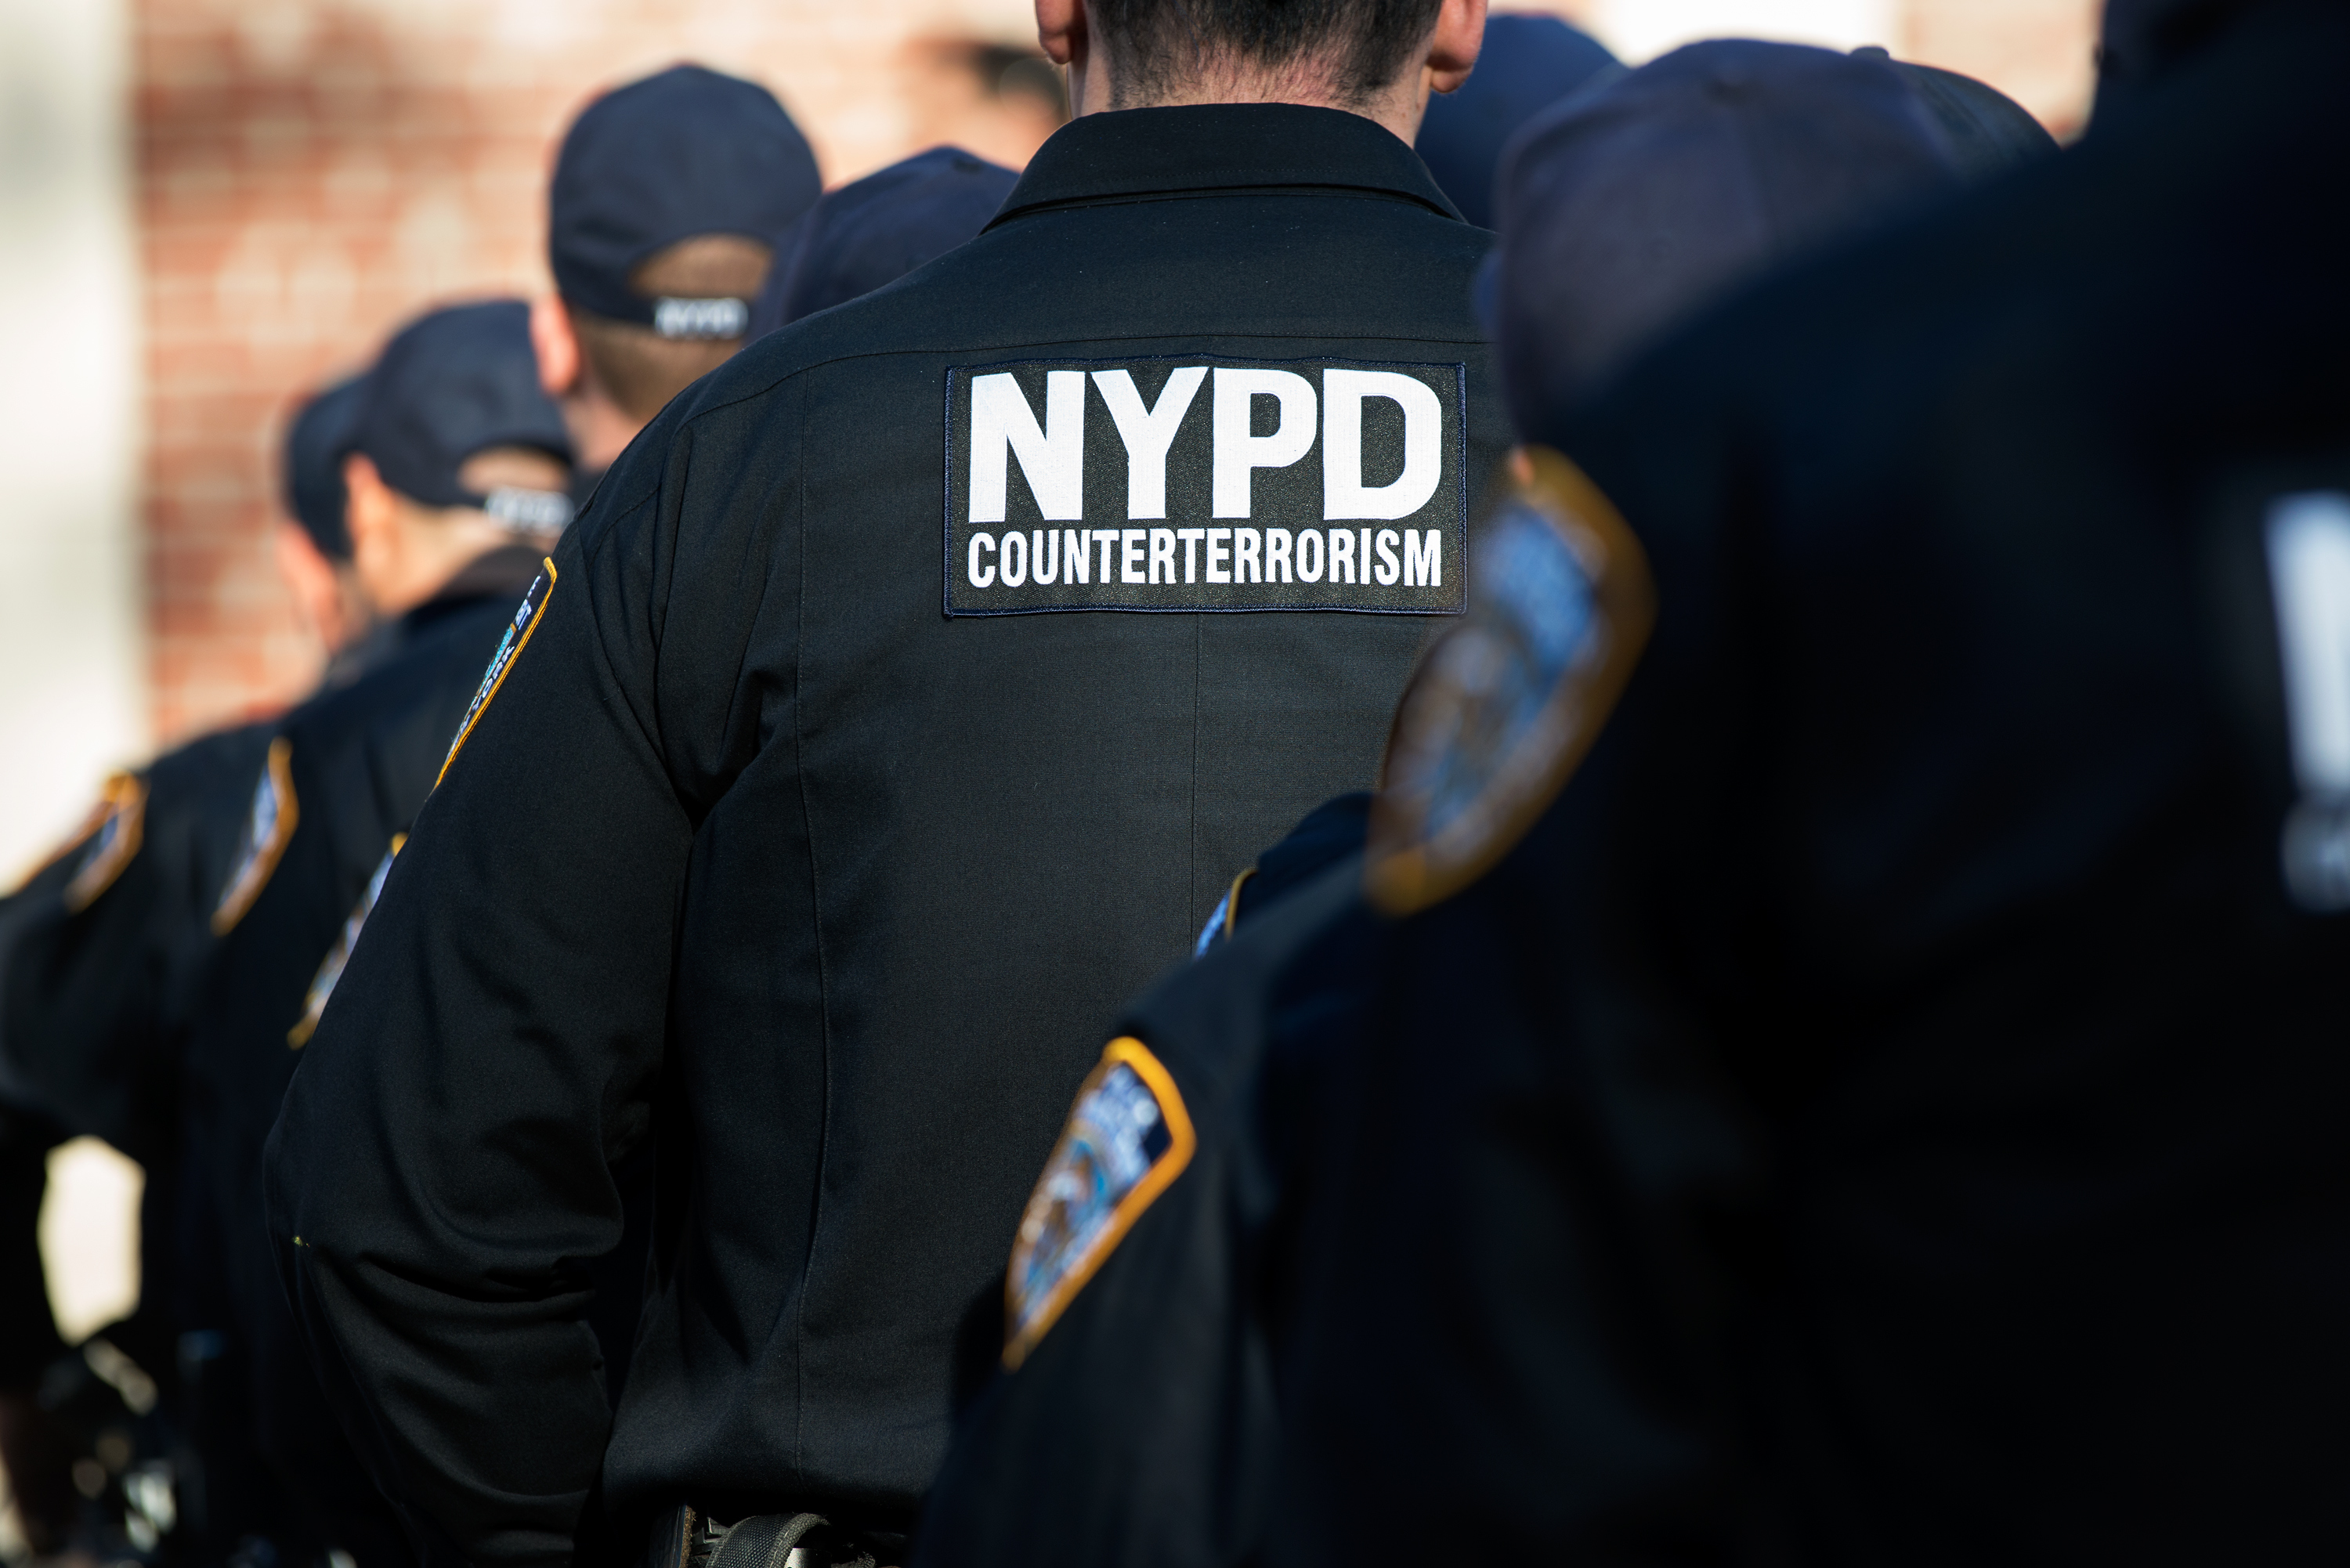 NYPD officers await the announcement of the formation of the Critical Command of the Counter-Terrorism Bureau in New York City on Nov. 16, 2015. (Bryan Thomas—Getty Images)